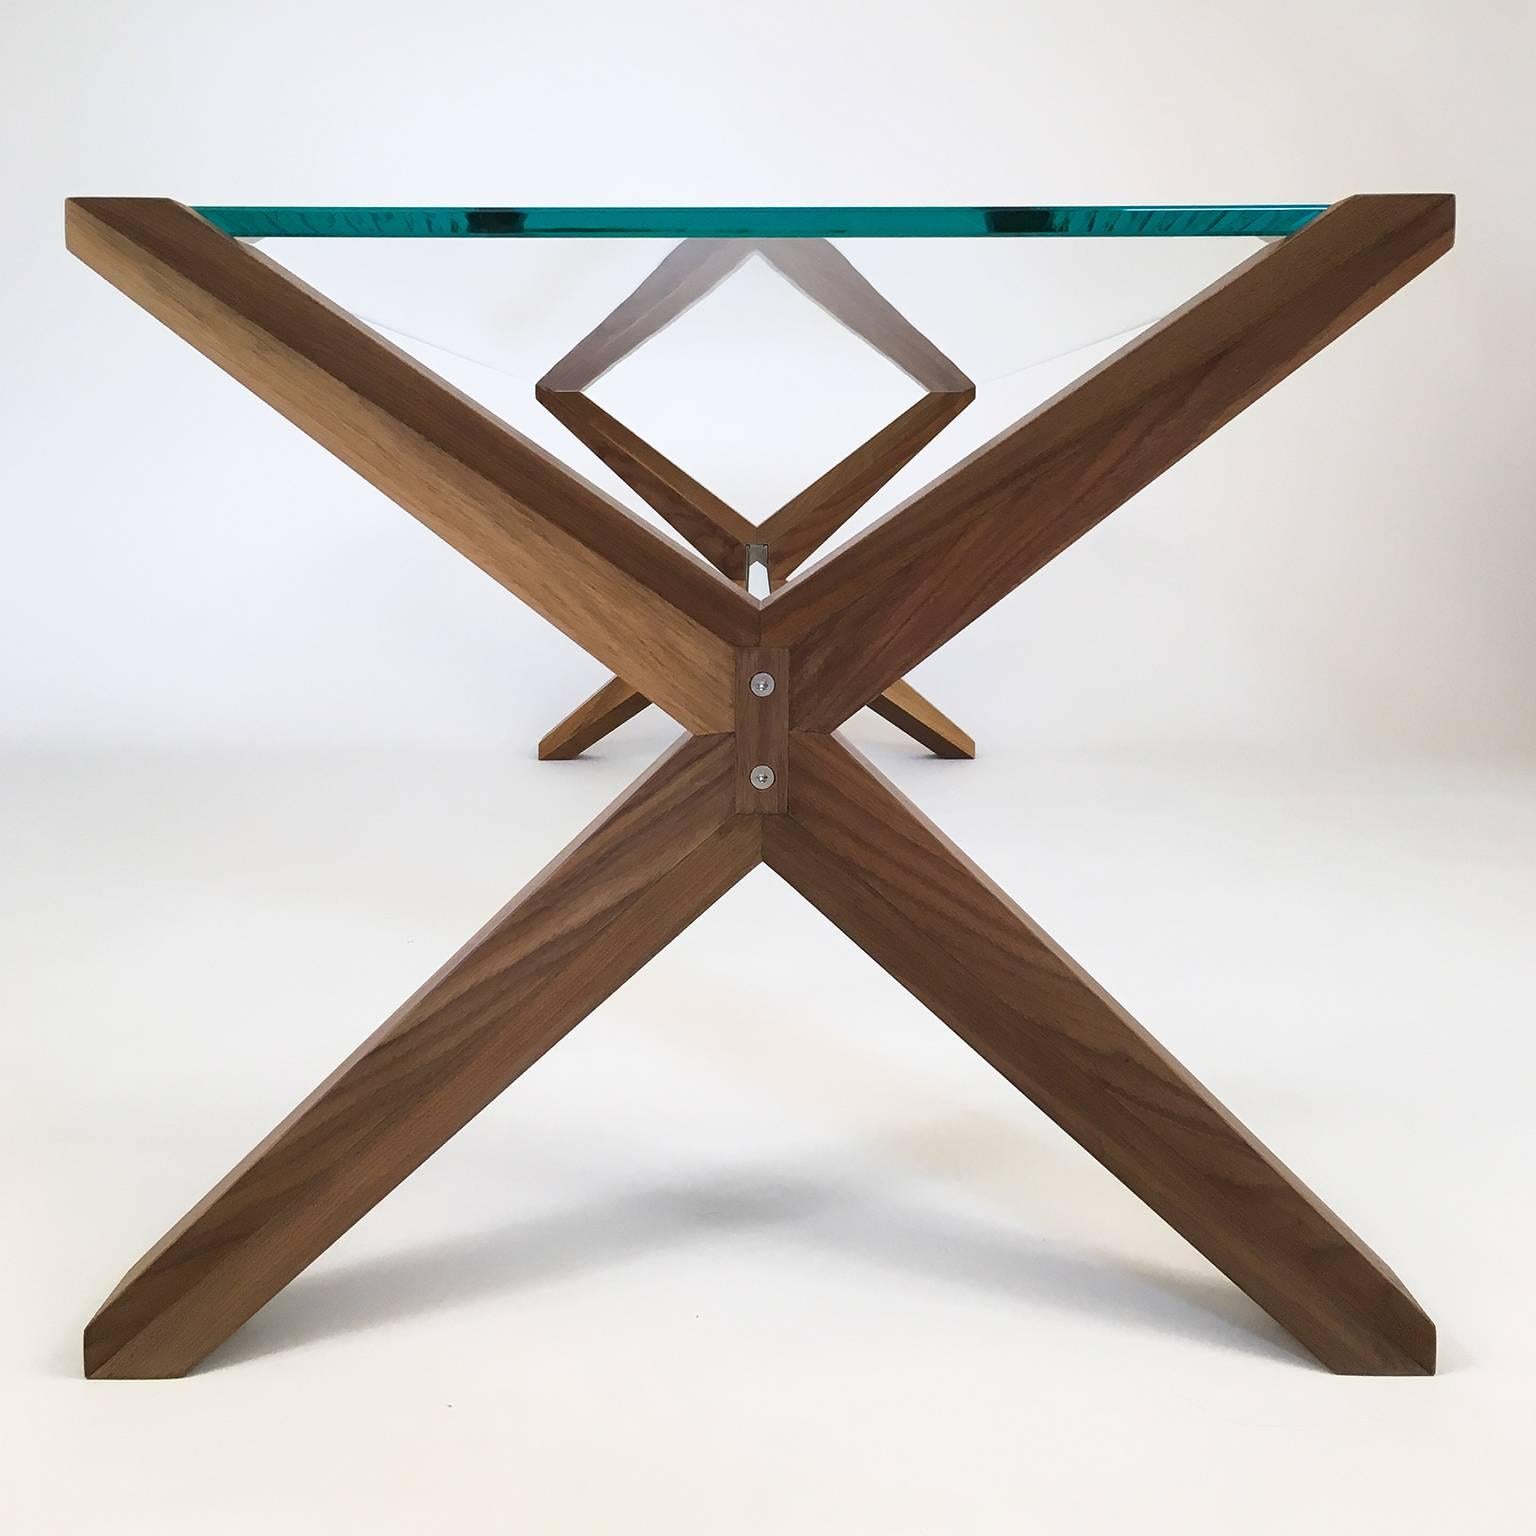 The Stay table is a re-interpretation of a Classic typology. A glass 